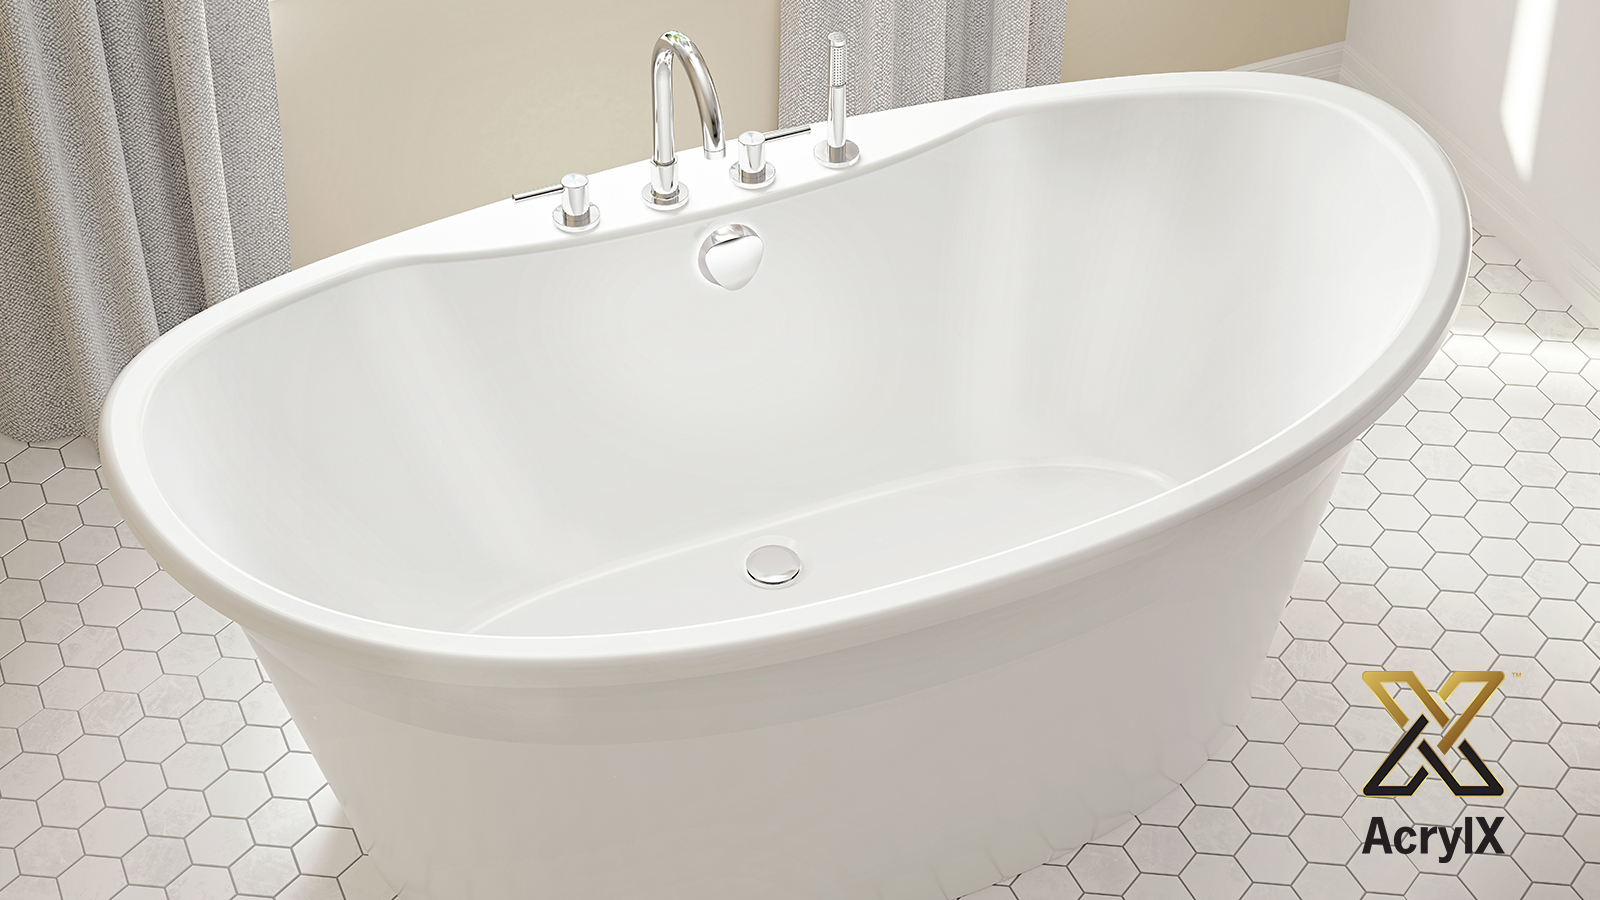 Image of a free standing oval soaking tub.